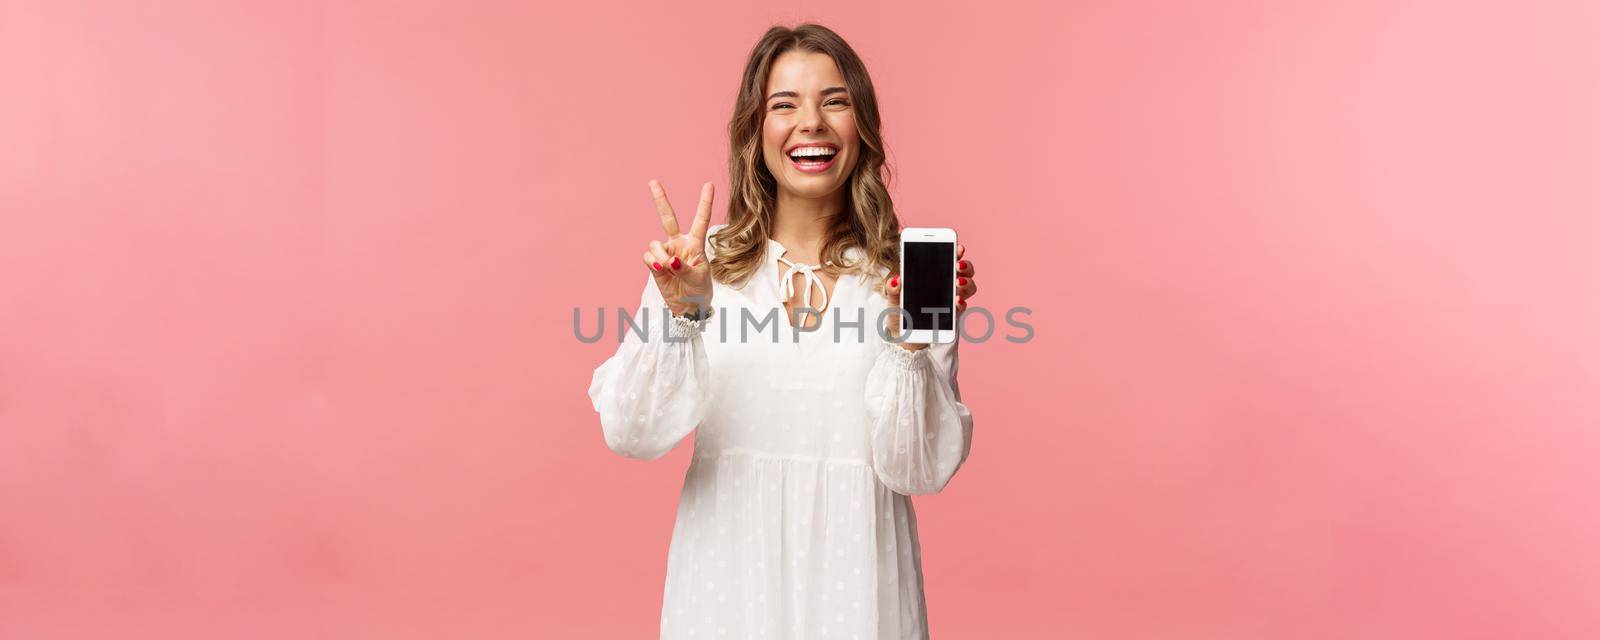 Portrait of kawaii optimistic and happy young girl in white dress, show mobile phone display and peace sign, laughing feeling cheerful and glad to share awesome app, useful link, pink background.